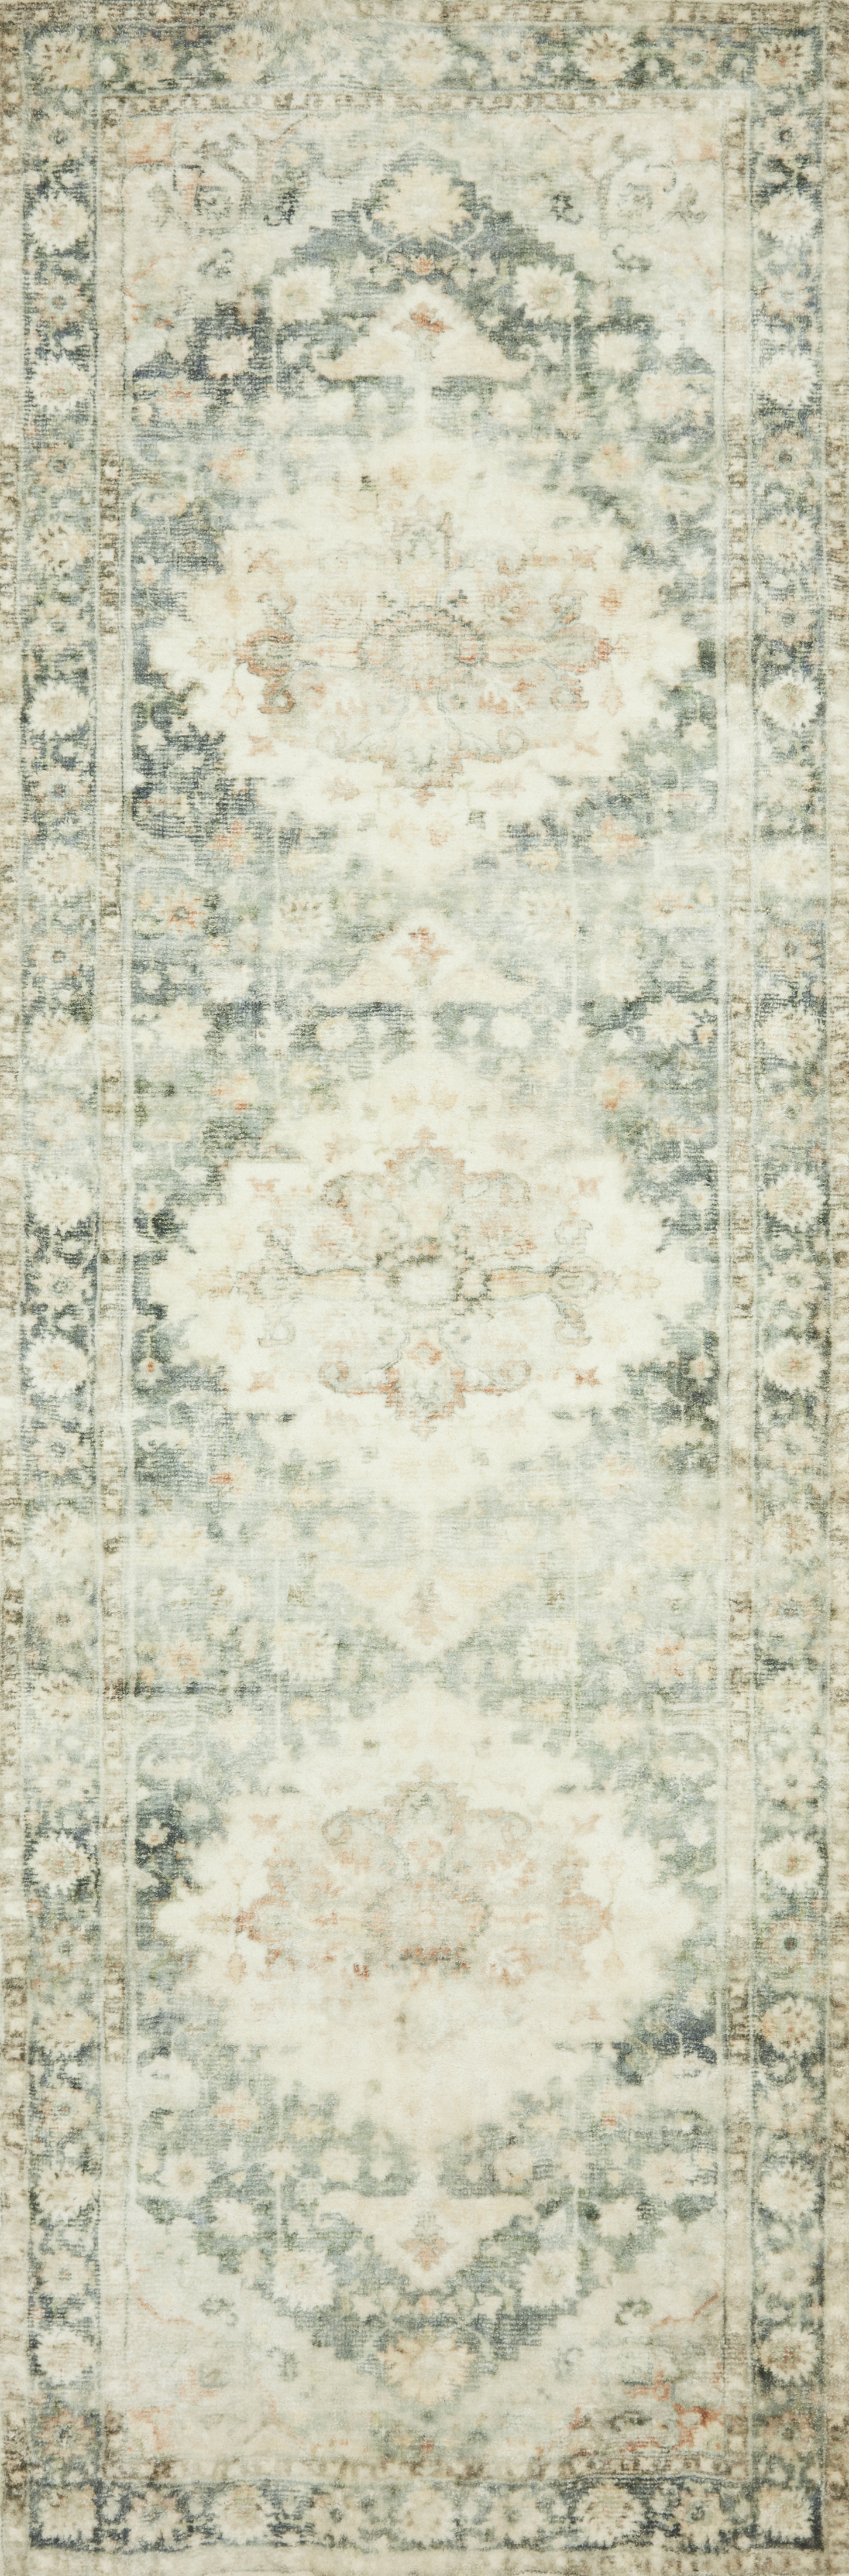 Rosette ROS-08 Teal / Ivory 2'-2" x 3'-8" - Image 2